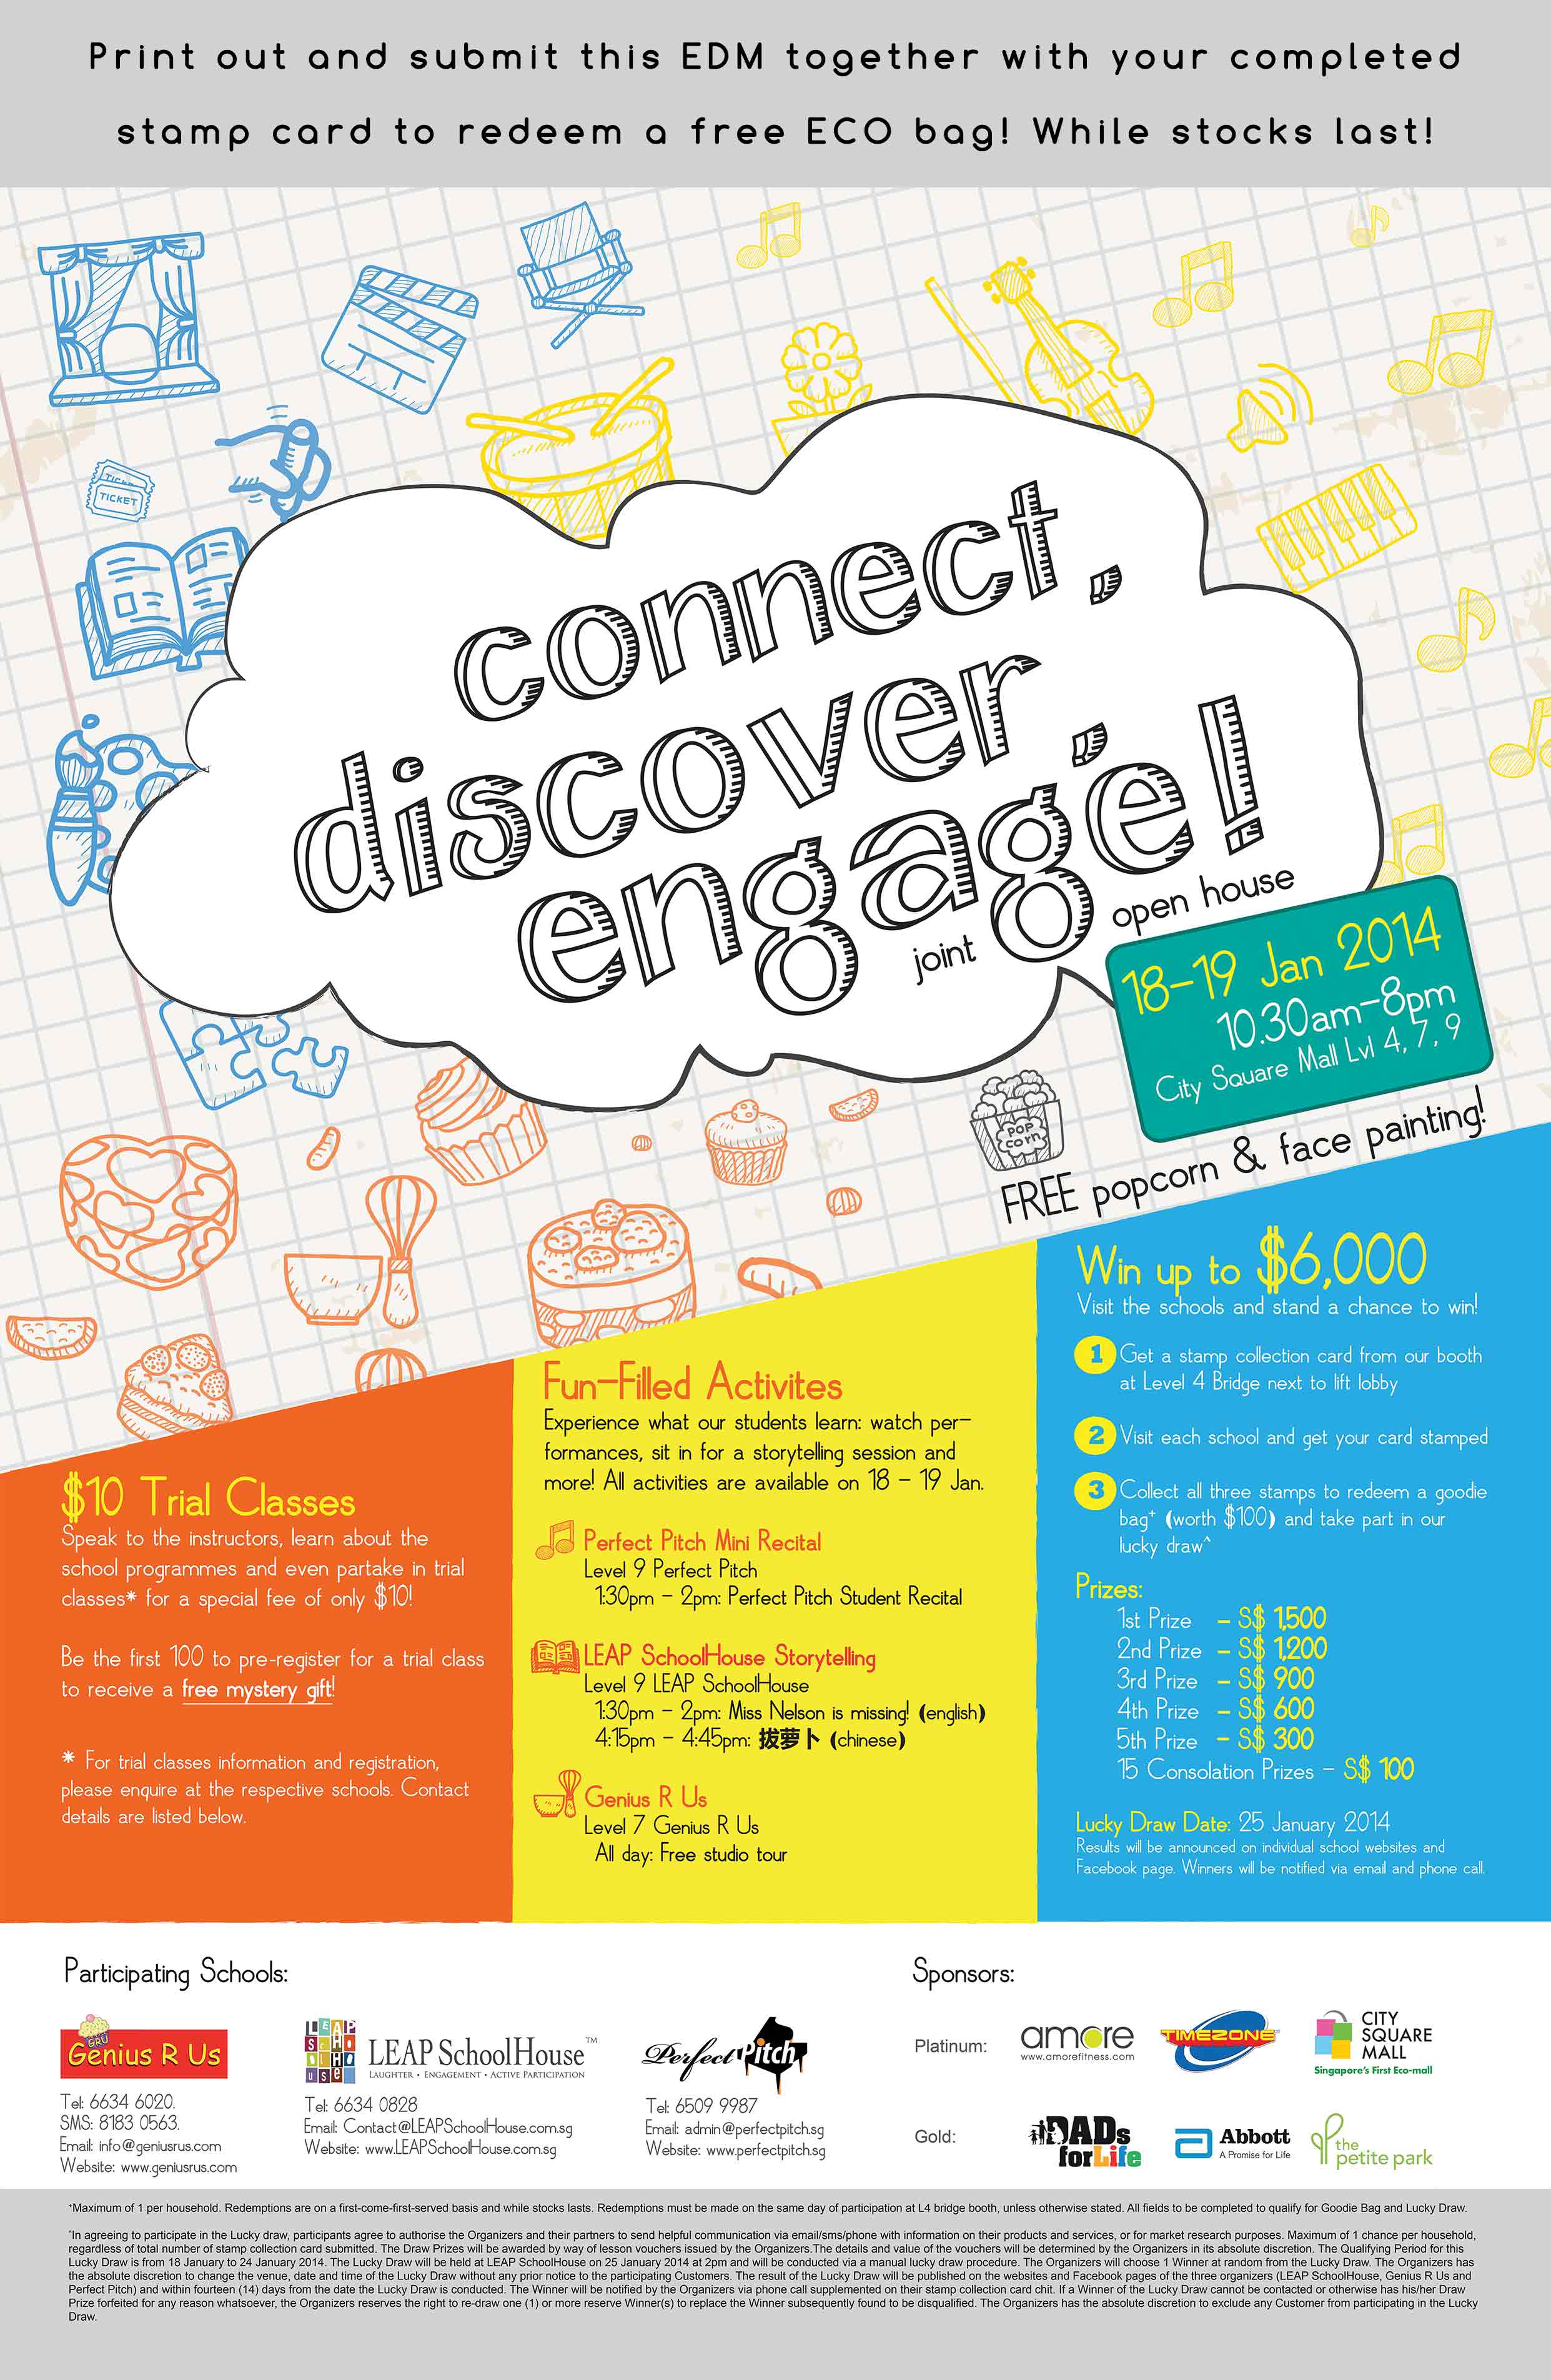 connect, discover, engage! joint open house on 18-19 Jan 2014 10.30am - 8pm at City Square Mall Lvl 4, 7, 9. Print out and submit this EDM together with your completed stamp card to redeem a free ECO bag! While stocks last! $10 Trial Classes. Fun-filled Activities and win up to $6,000. By LEAP SchoolHouse, Genius R US and Perfect Pitch Mini Recital.